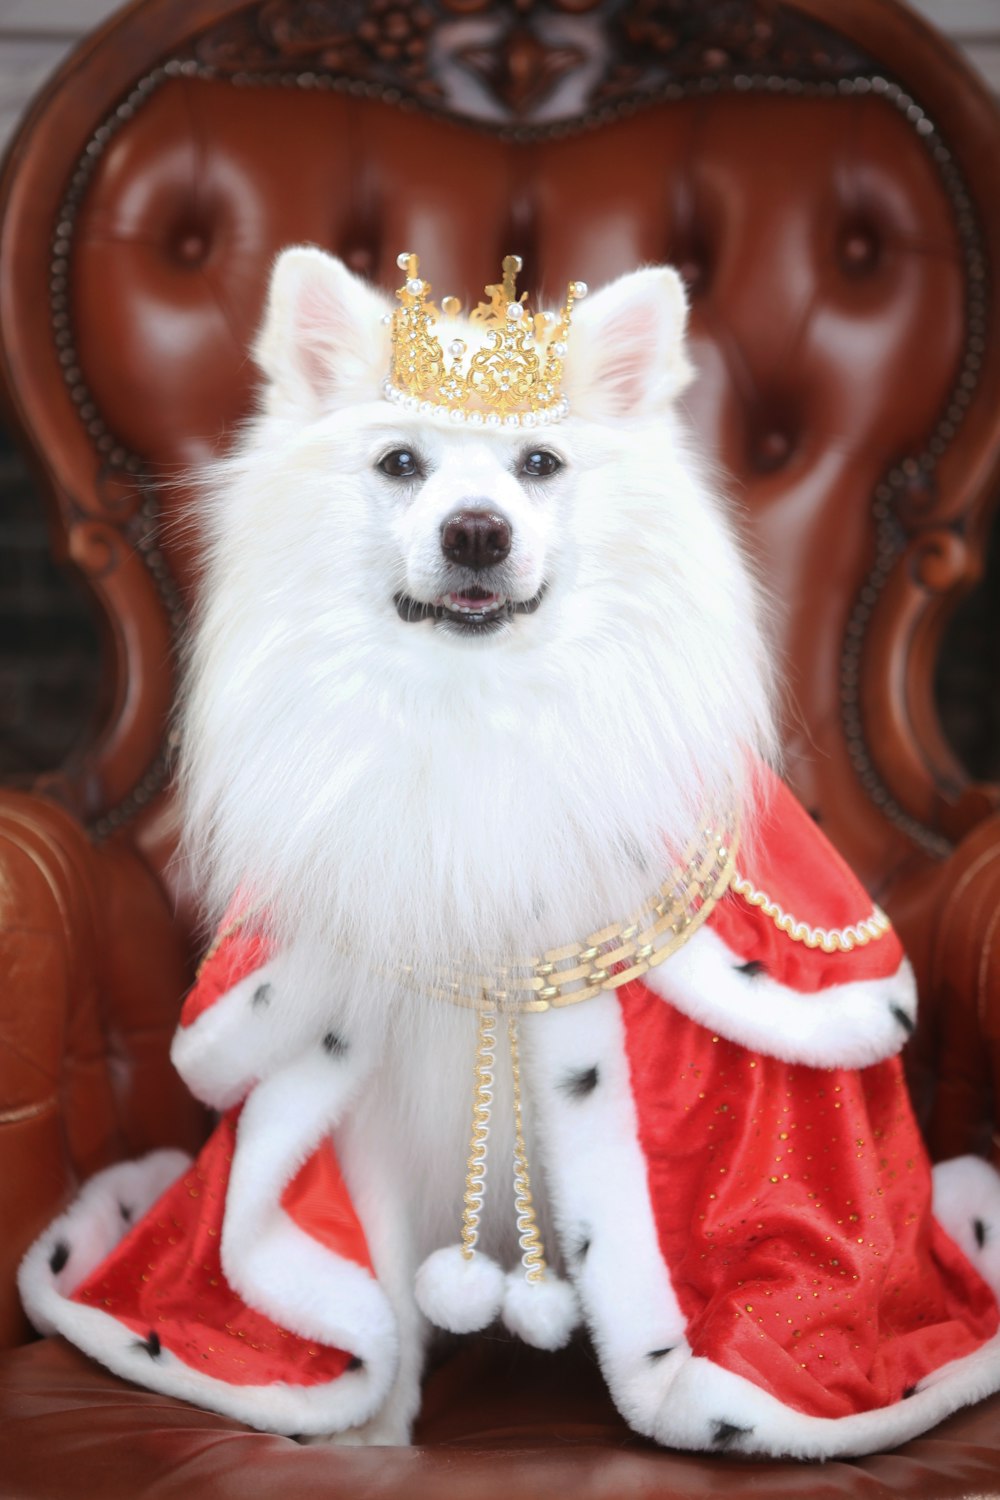 a white dog wearing a red dress and a gold crown